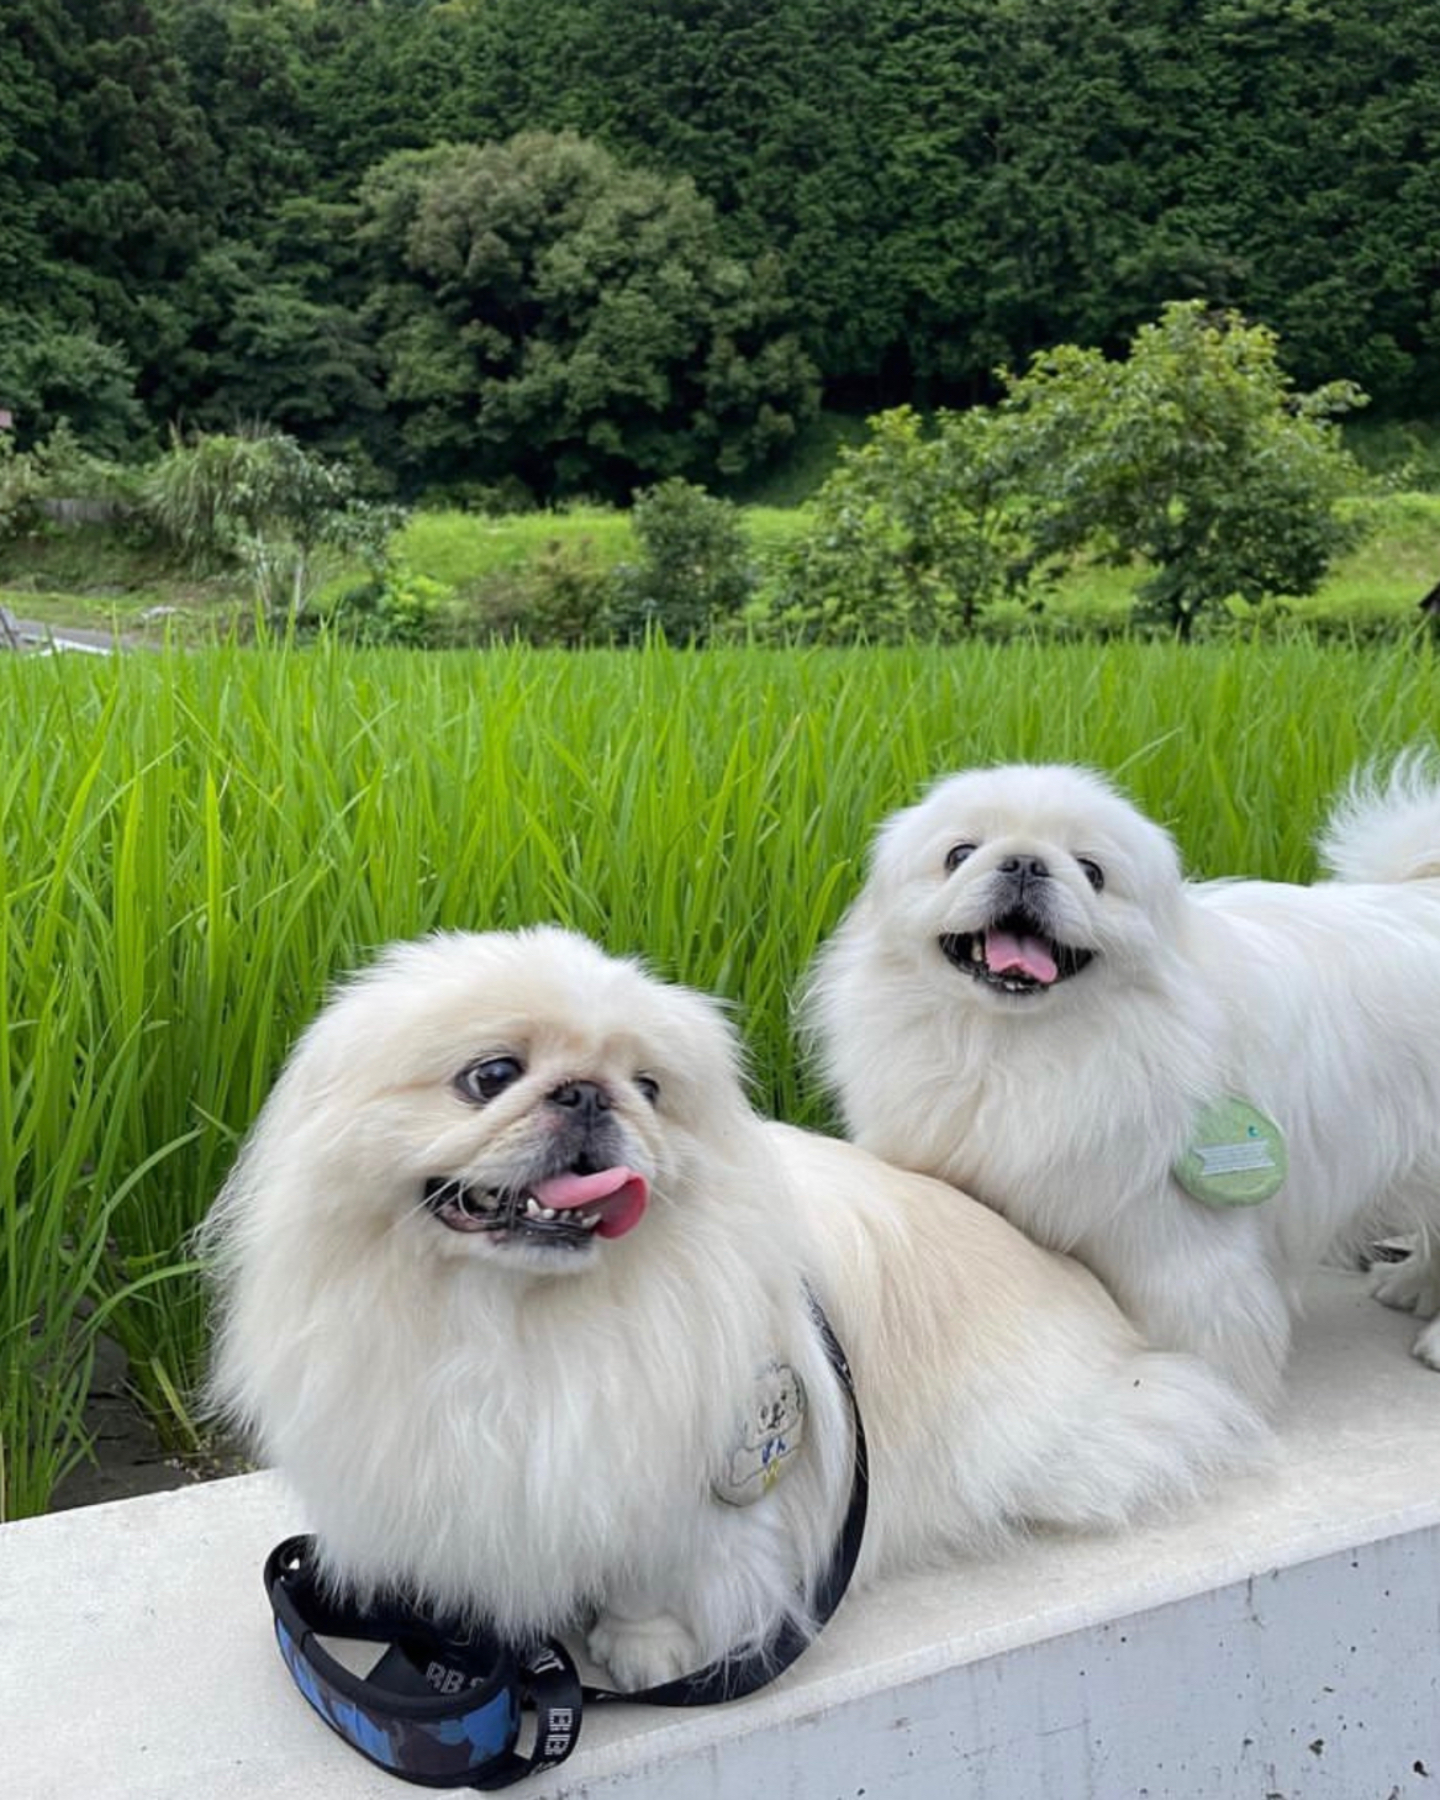 Two white dogs in nature